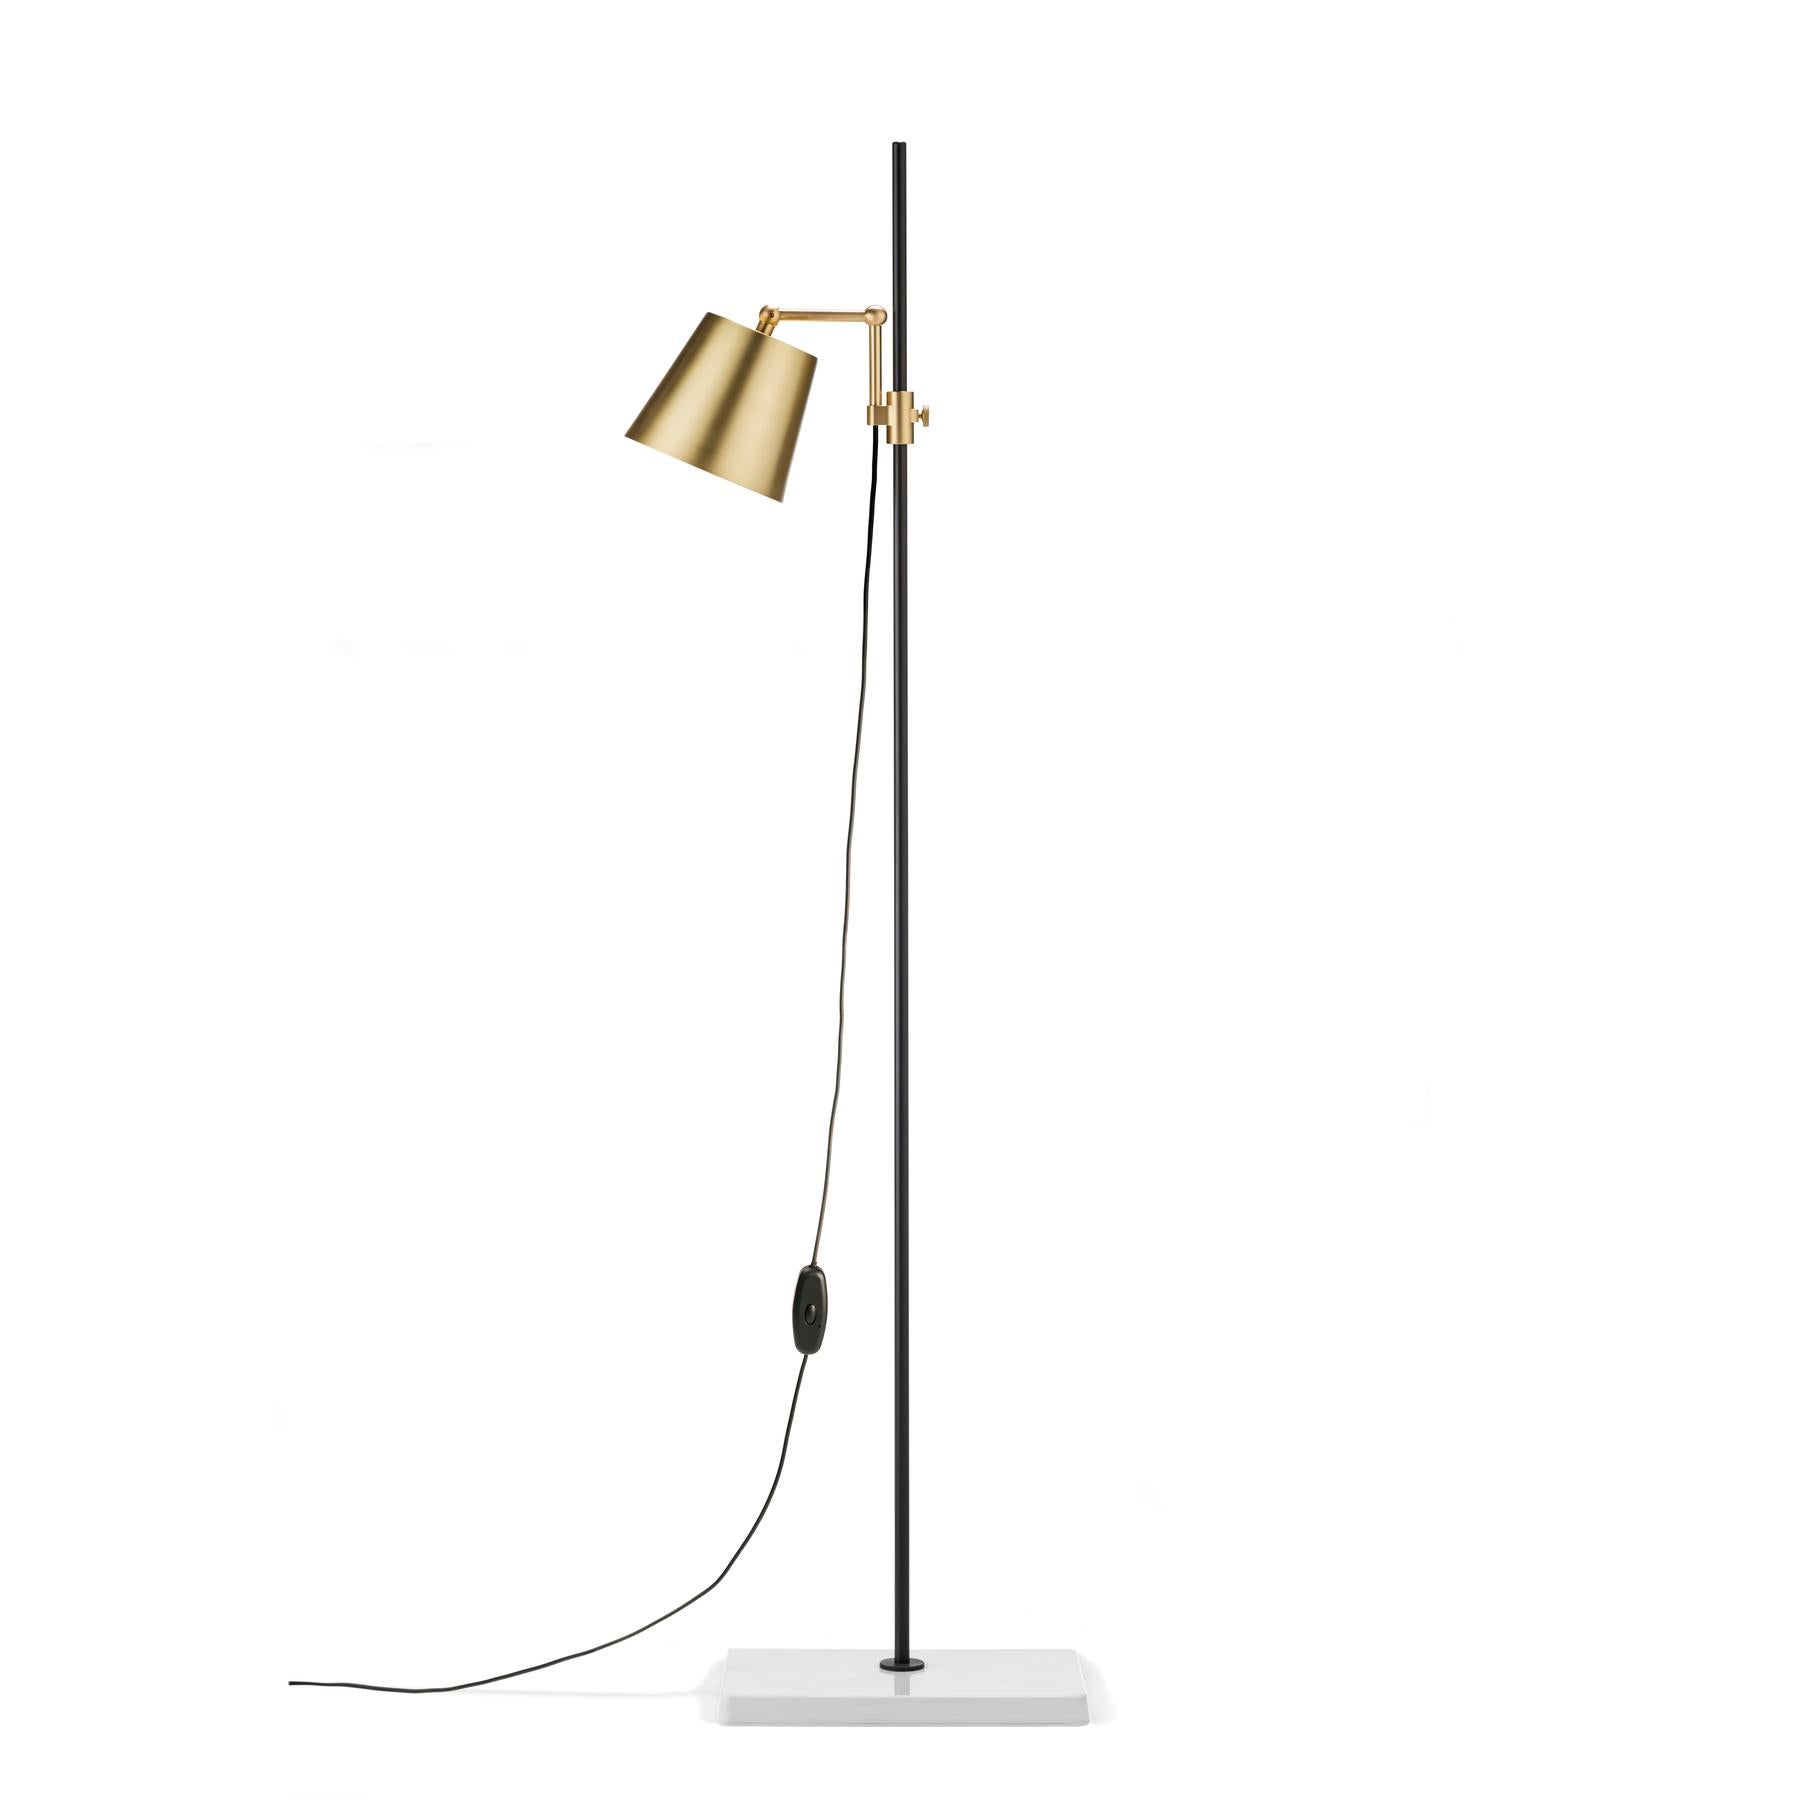 Floor lamp designed by Anatomy Design in 2010. 

The Lab light design came about from a genuine fascination with laboratory equipment and with all those fantastic clamps and levers — the perfect place to start designing a multi-functional